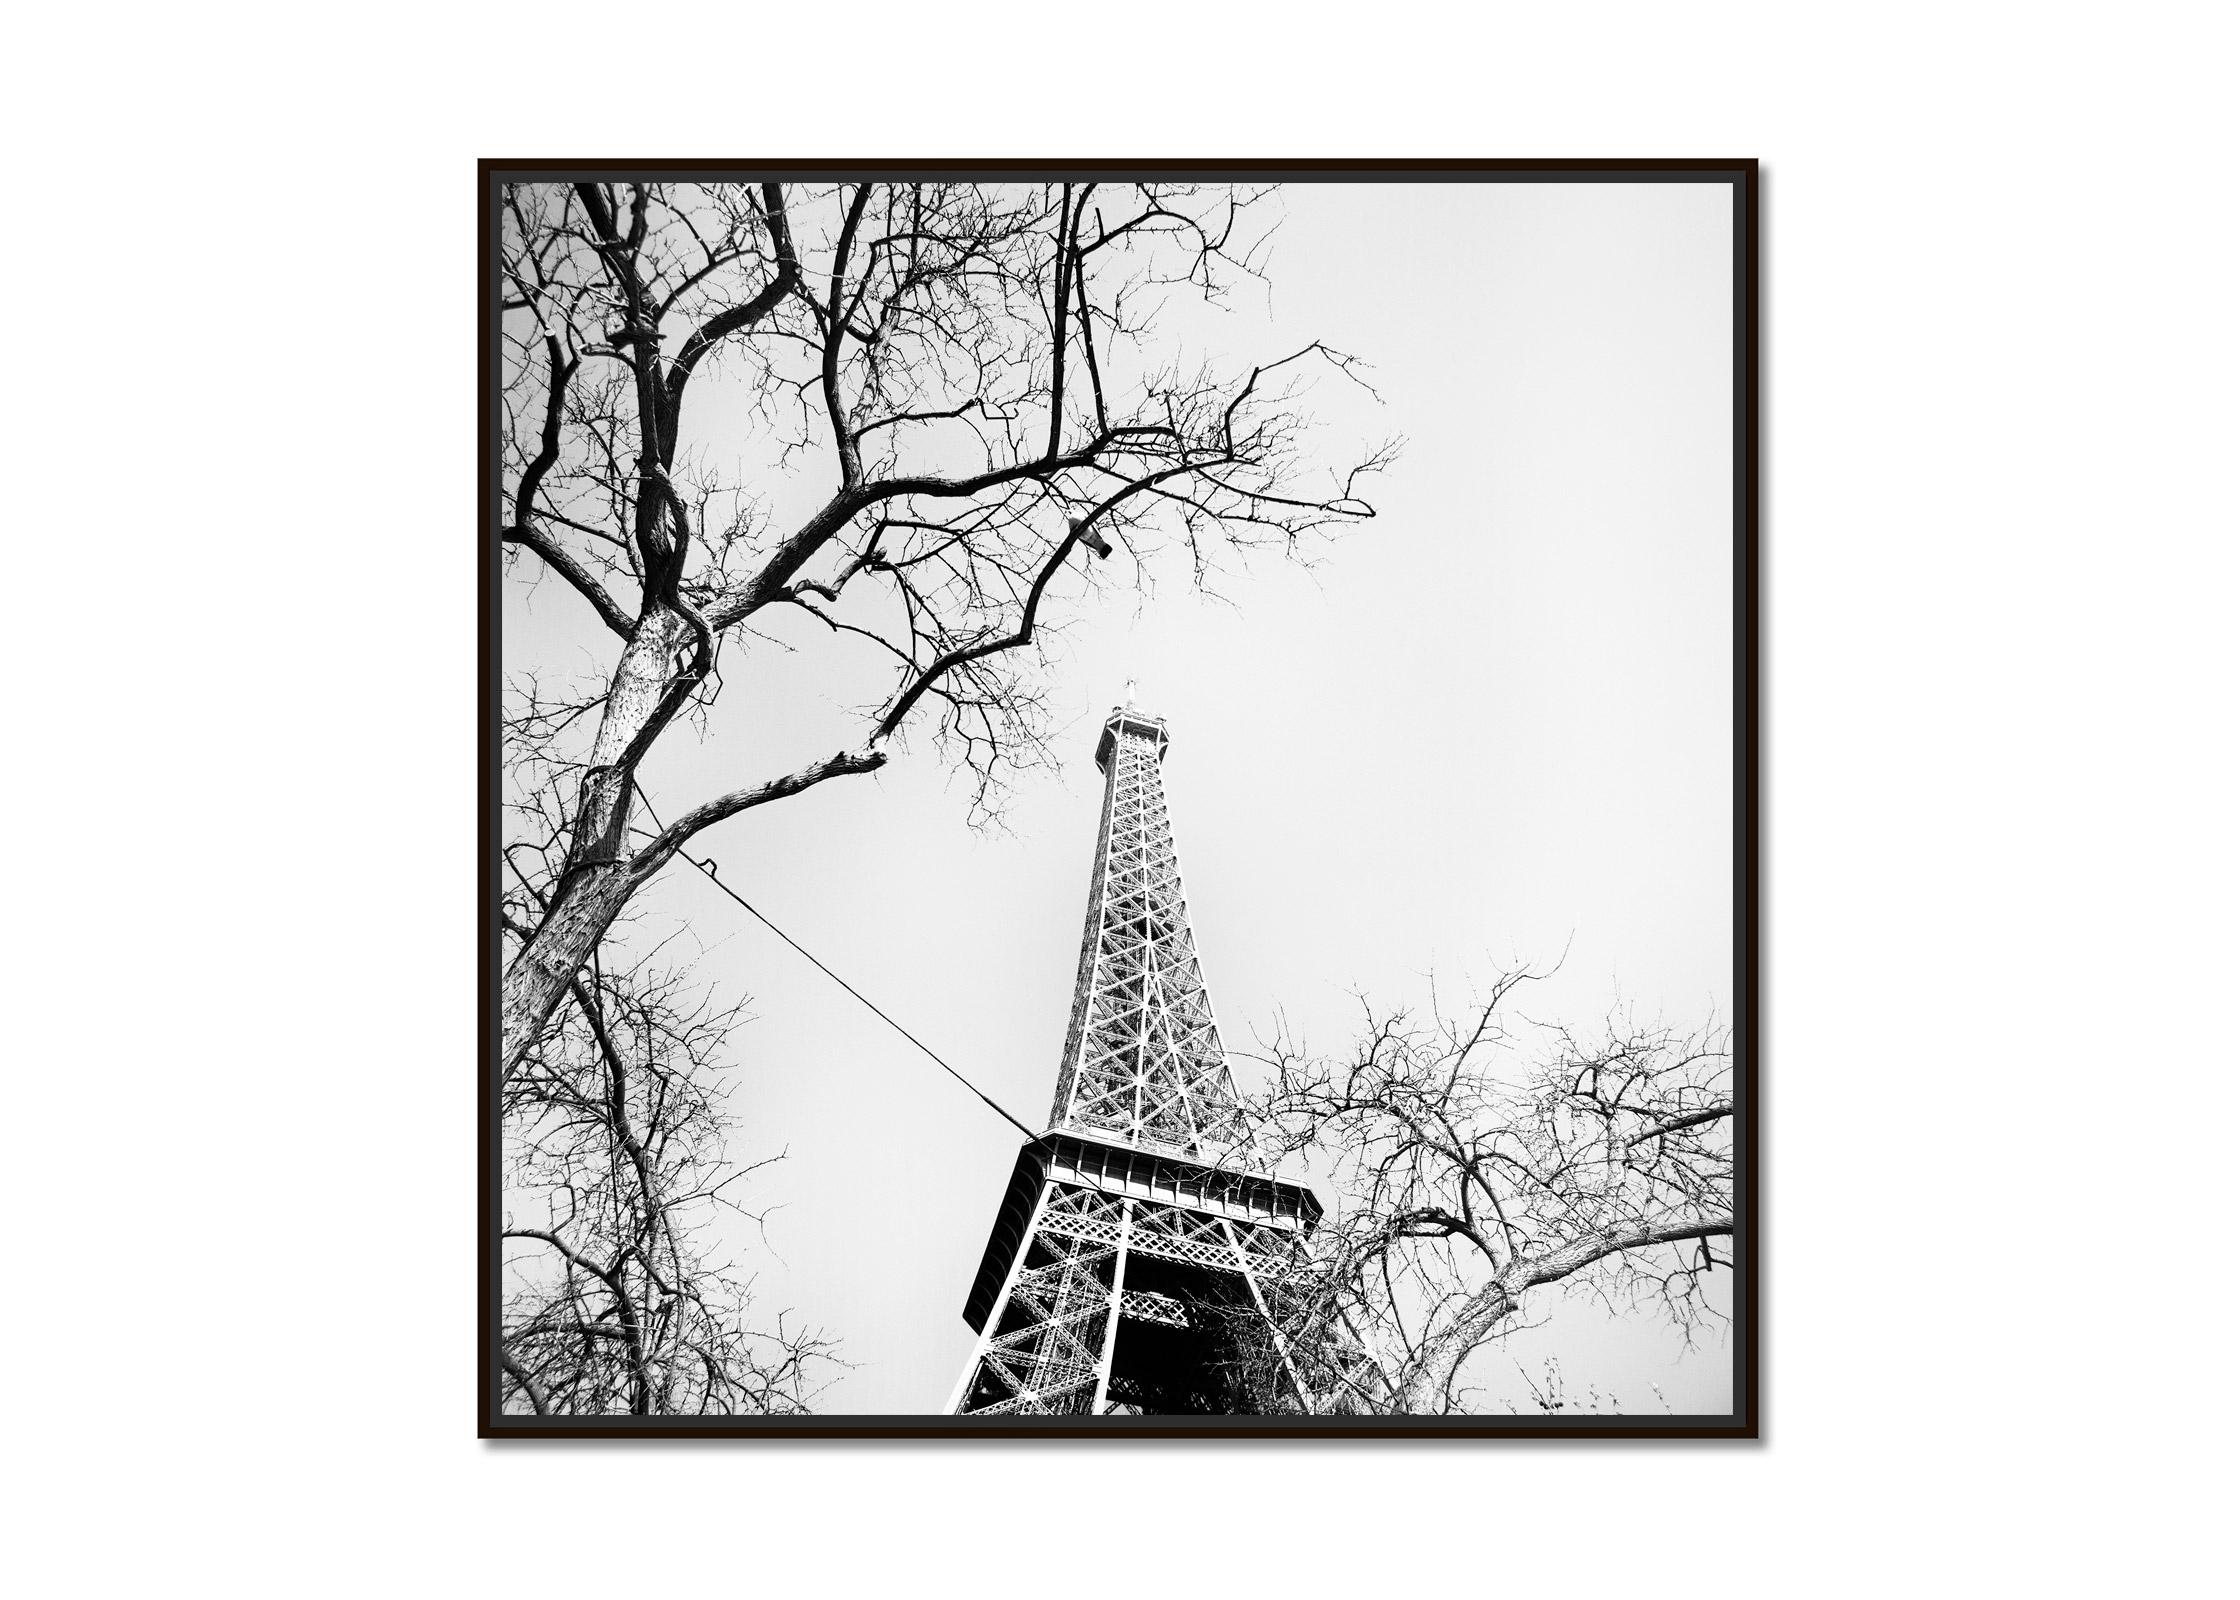 Pigeon and the Eiffel Tower, Paris, black & white cityscape fine art photography - Photograph by Gerald Berghammer